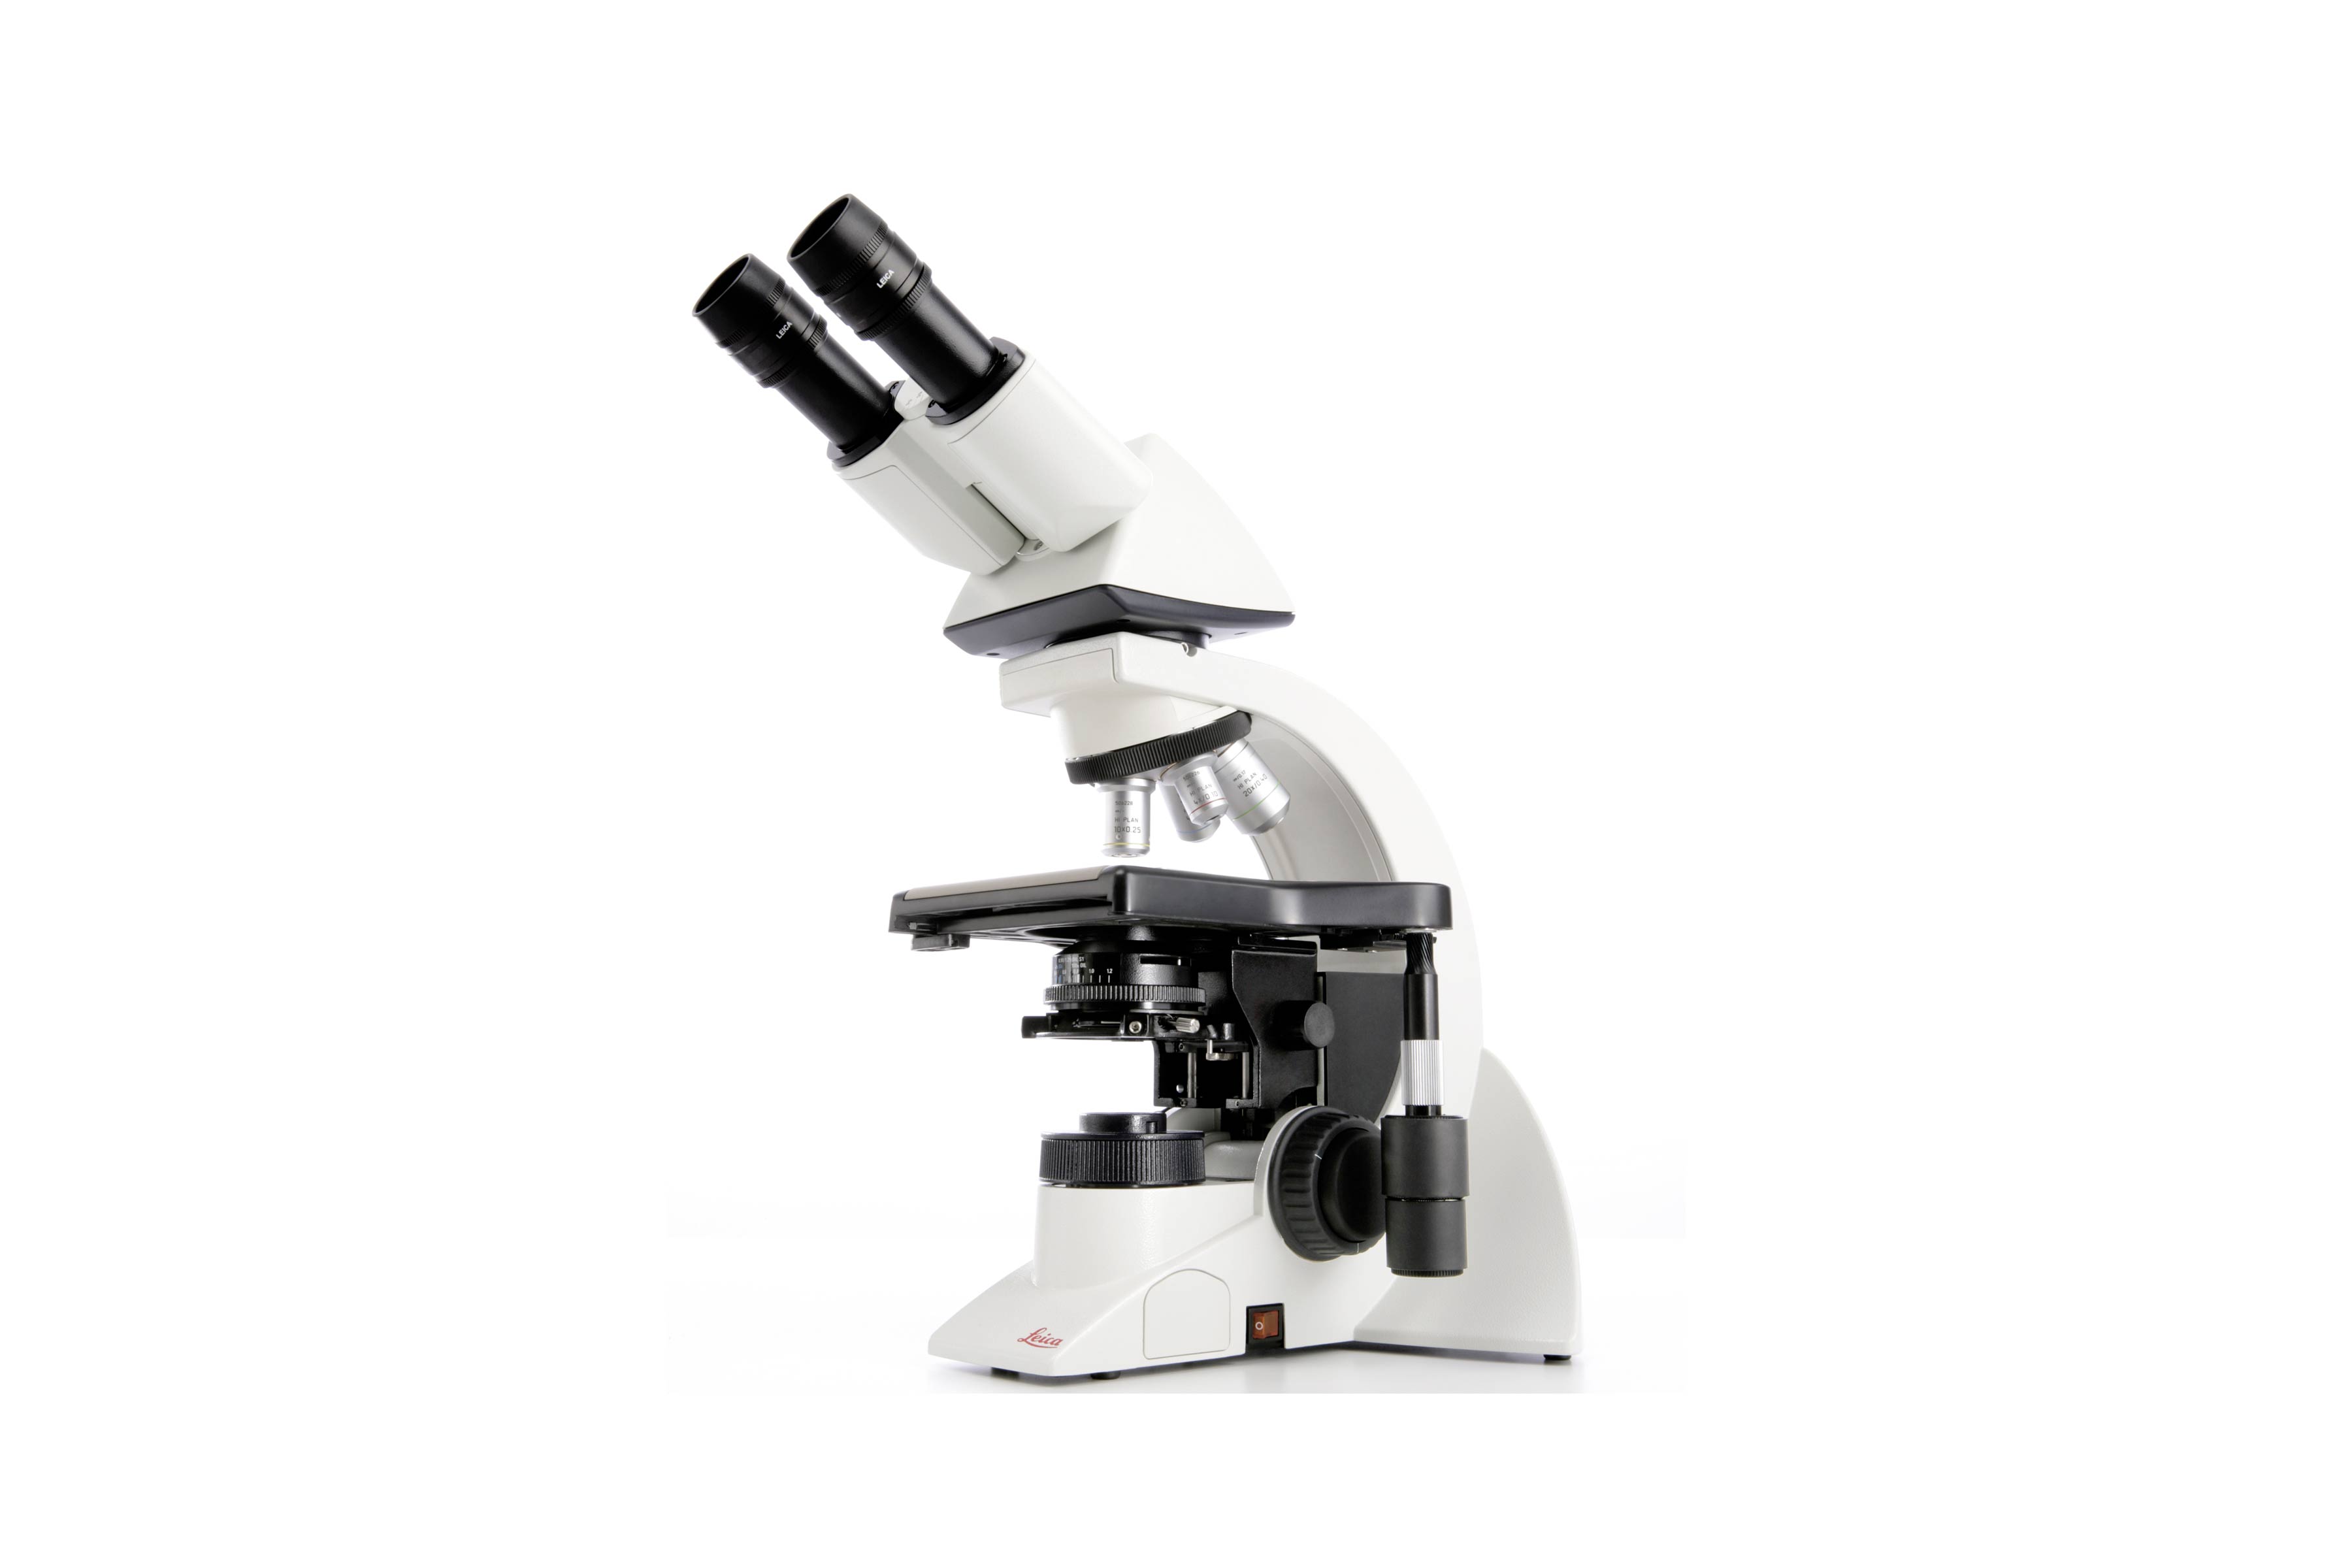 The Leica DM1000 LED combines the advantages of a fully ergonomic system microscope with innovative LED illumination, and unlimited possibilities in mobile use.